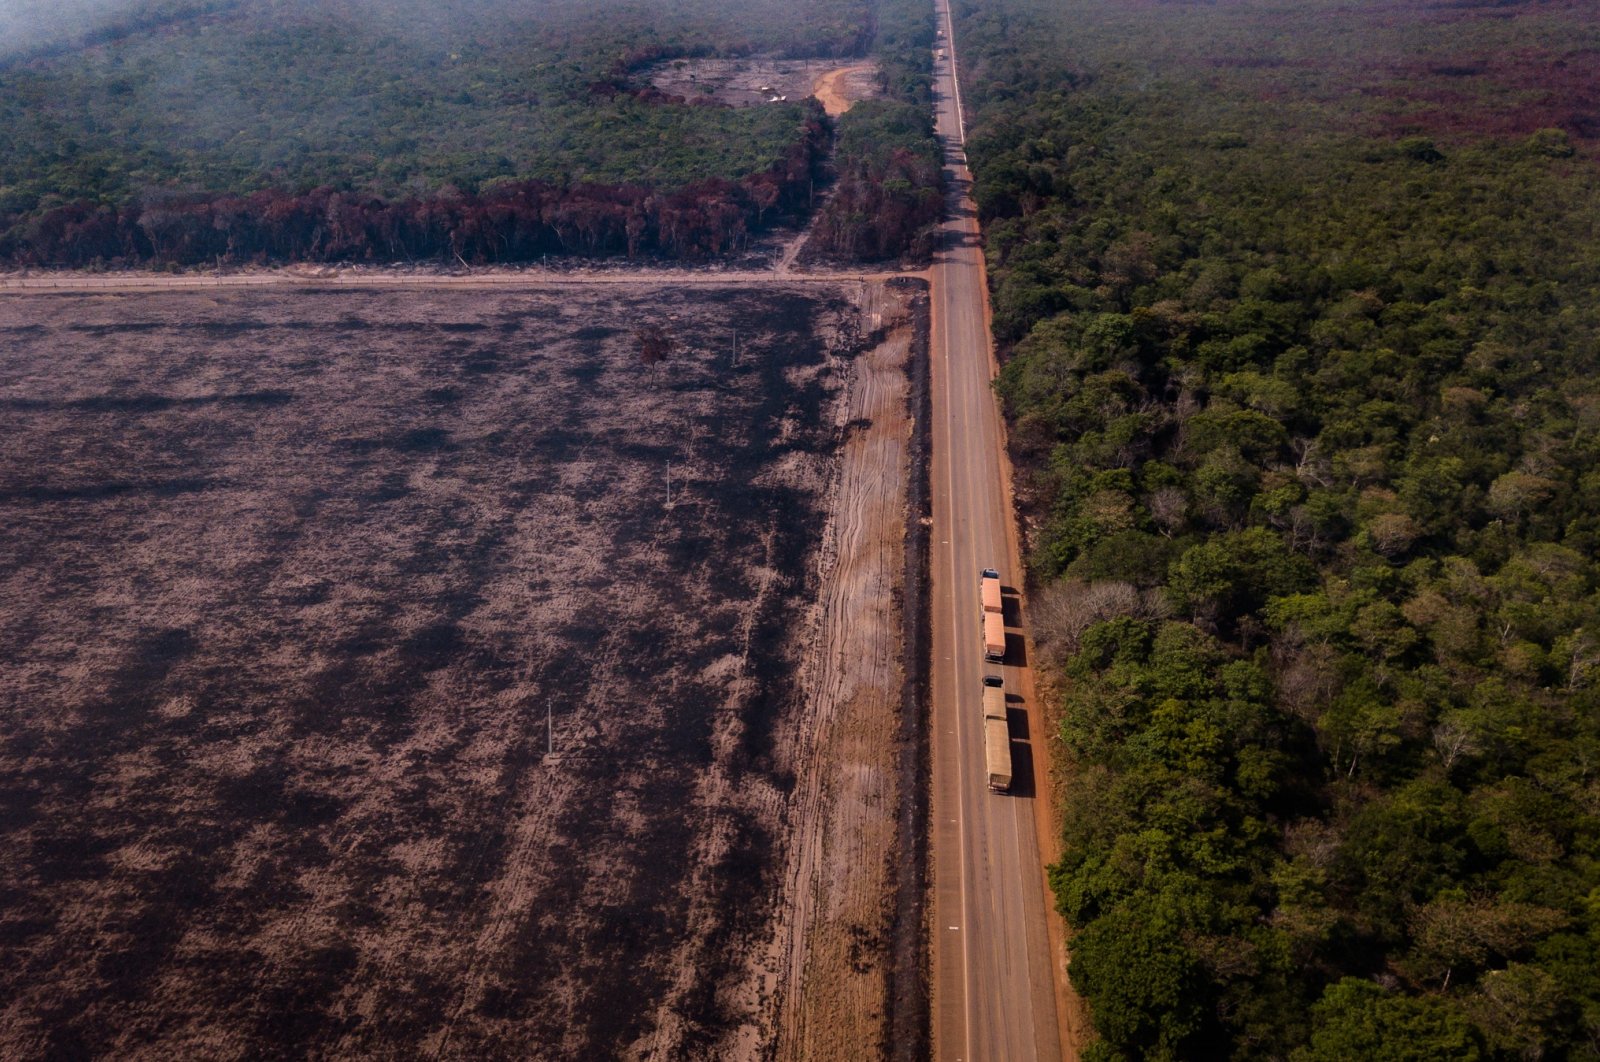 Overview of burnings in the vicinity of the BR-163 highway in the state of Para, northern Brazil, Amazon region, Aug. 29, 2019. (Gustavo Basso/NurPhoto via Getty Images)